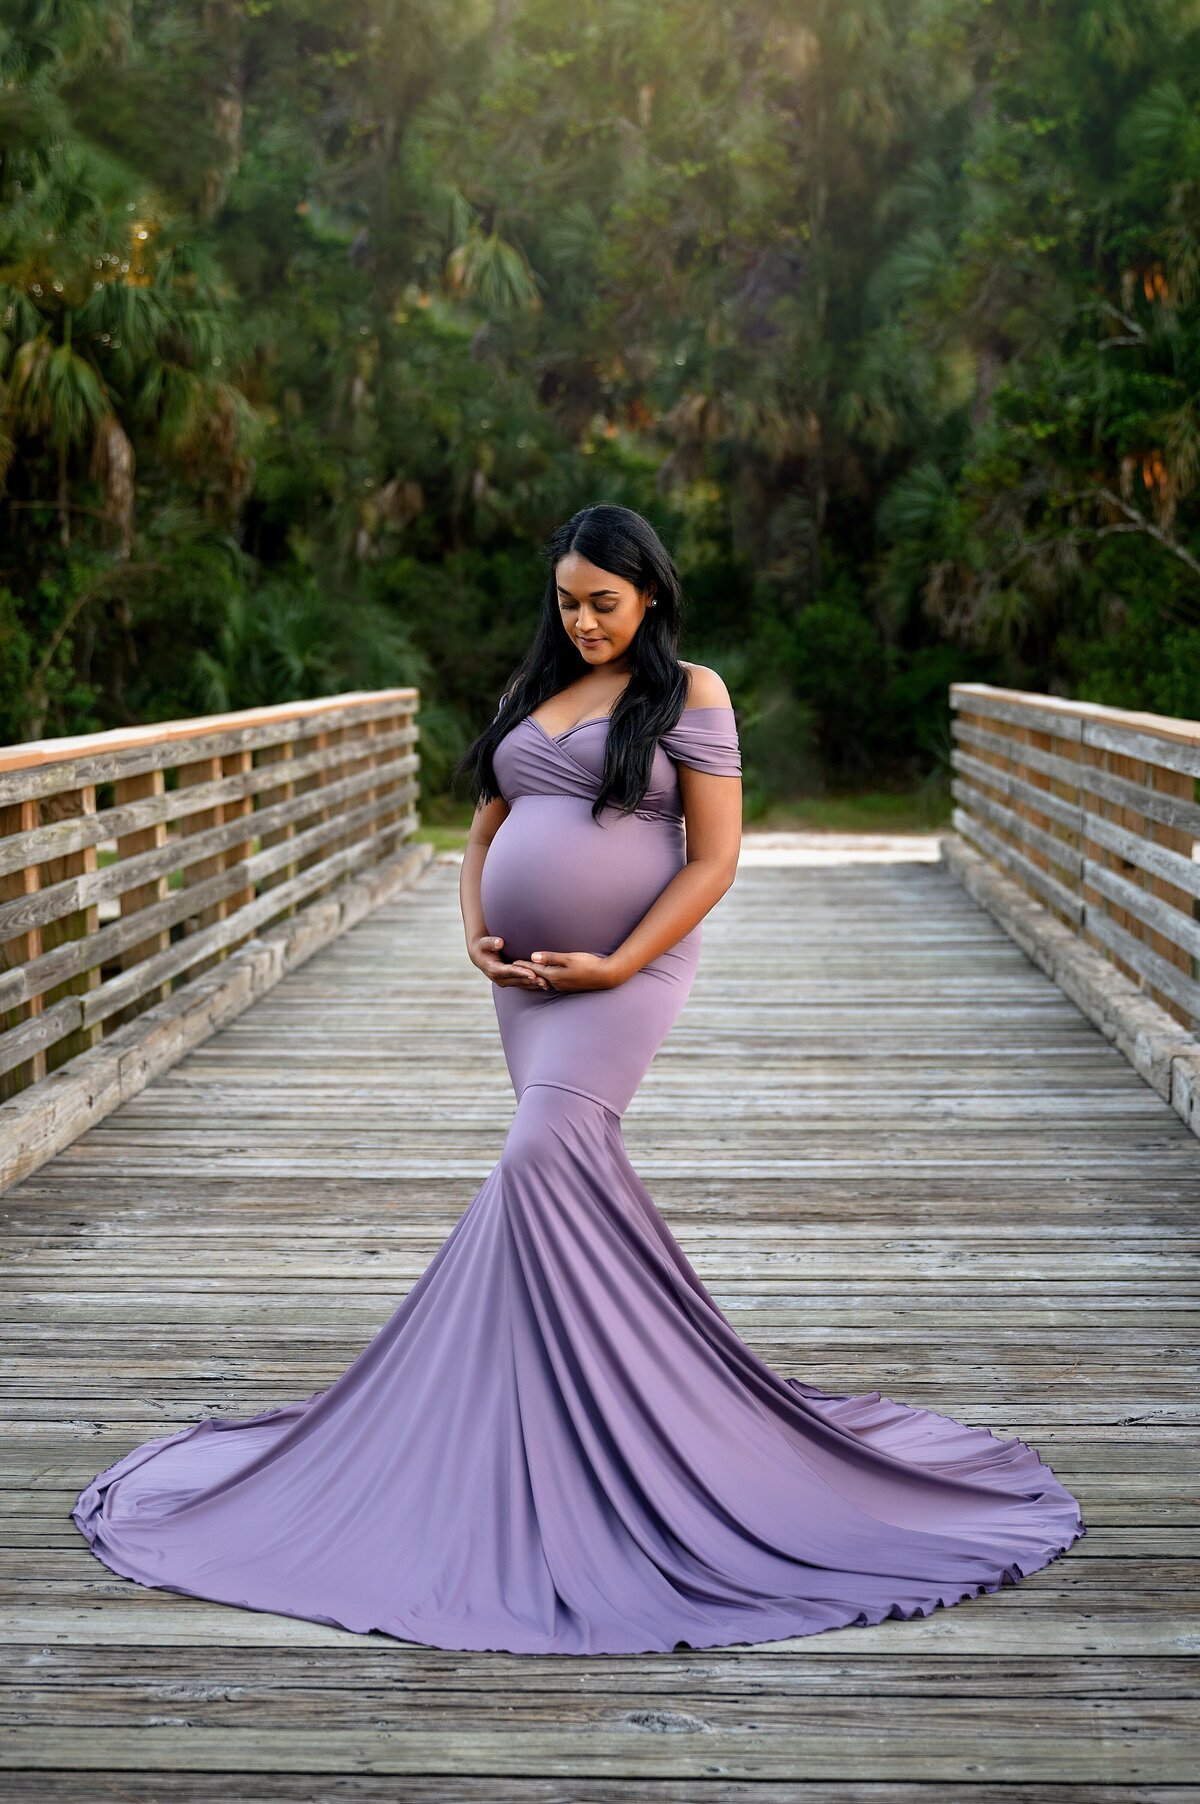 Pregnant model poses on a bridge during sunset in Jupiter for a photoshoot.